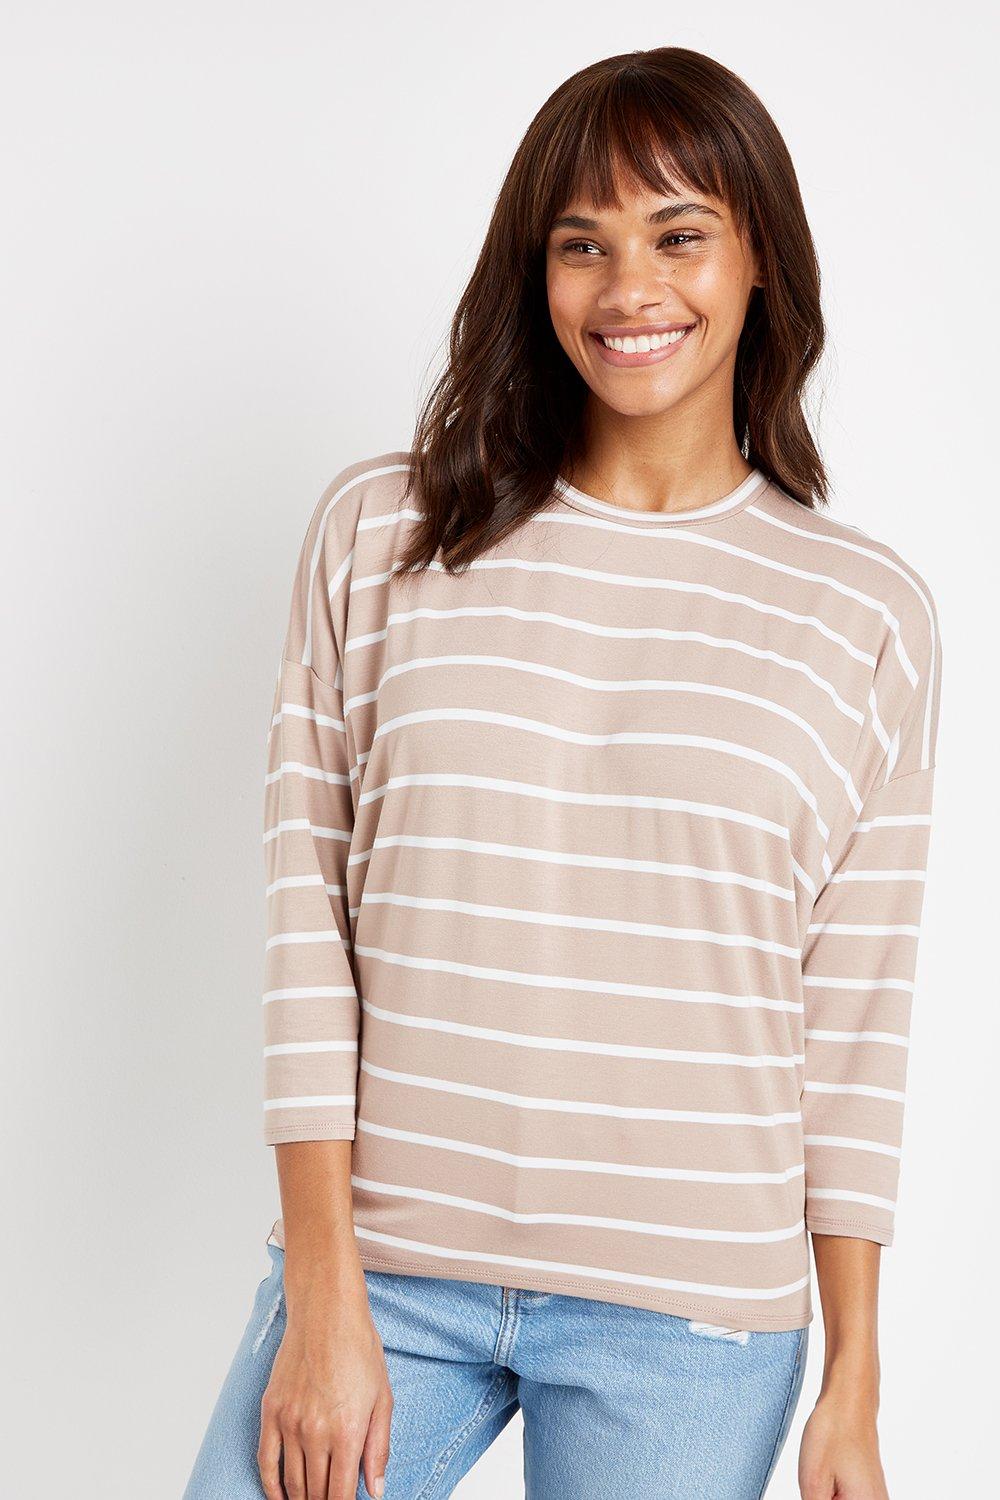 This Classic Striped Top Features A Chic Stone Colourway And Contemporary Batwing Sleeves. Wear With Blue Jeans And Boots For Easy Everyday Style.  Top Round Neck 3/4 Sleeve Relaxed Casual 97% Viscose, 3% Elastane. Machine Washable.